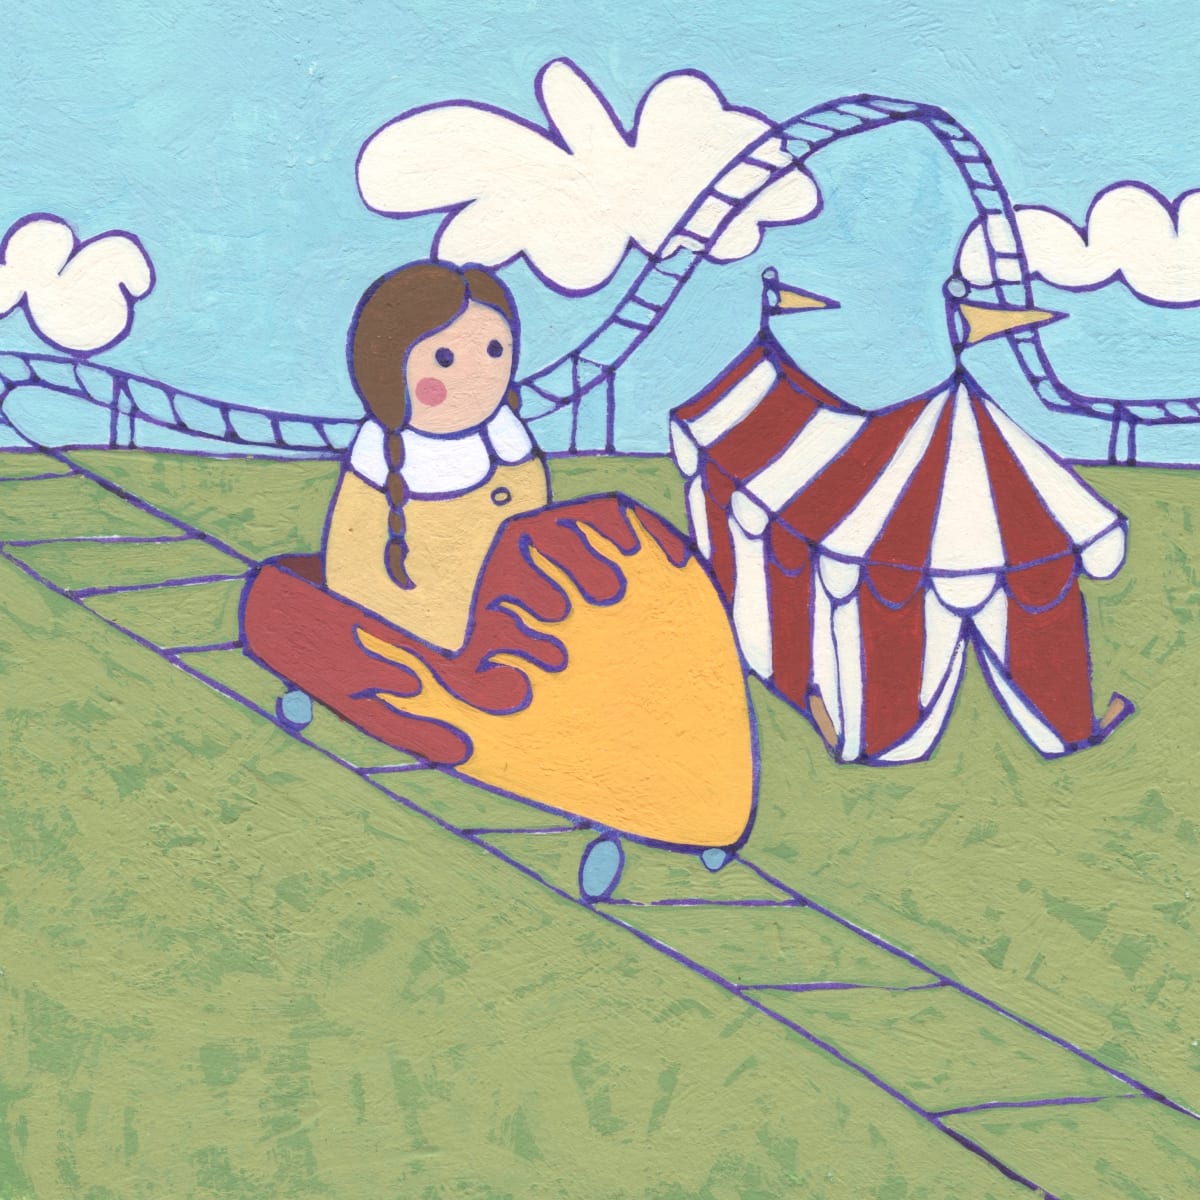 Lolly and the Rollercoaster Original Painting 